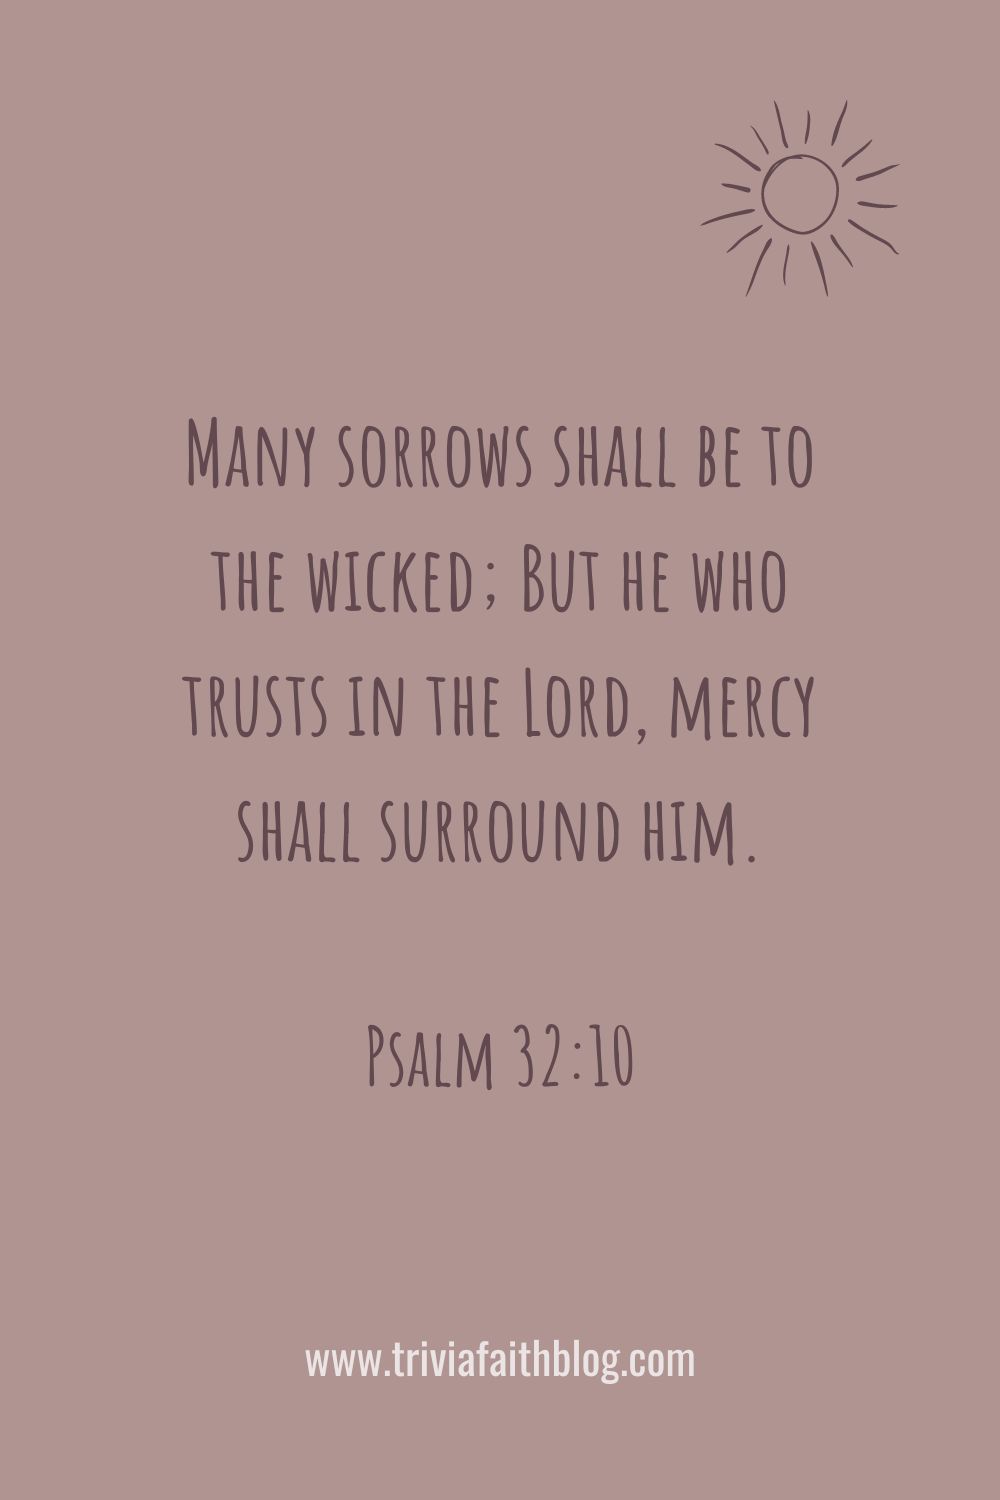 Many sorrows shall be to the wicked But he who trusts in the Lord, mercy shall surround him